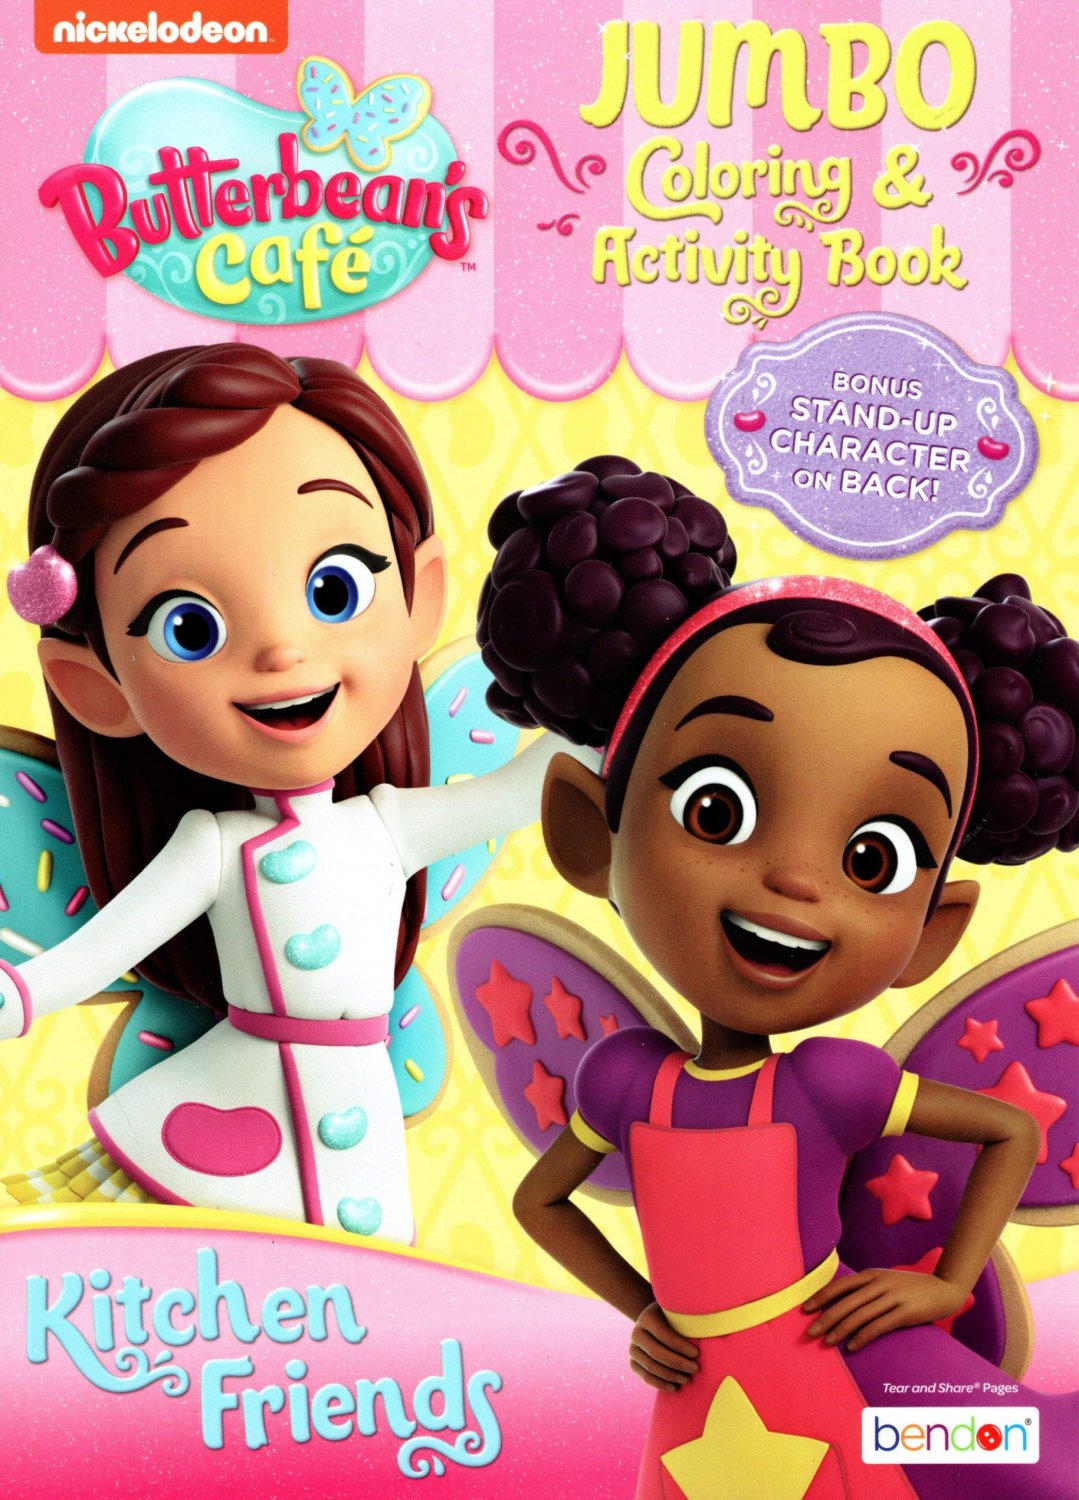 Download Nickelodeon Butterbean's Cafe - Jumbo Coloring & Activity Book - Kitchen Friends